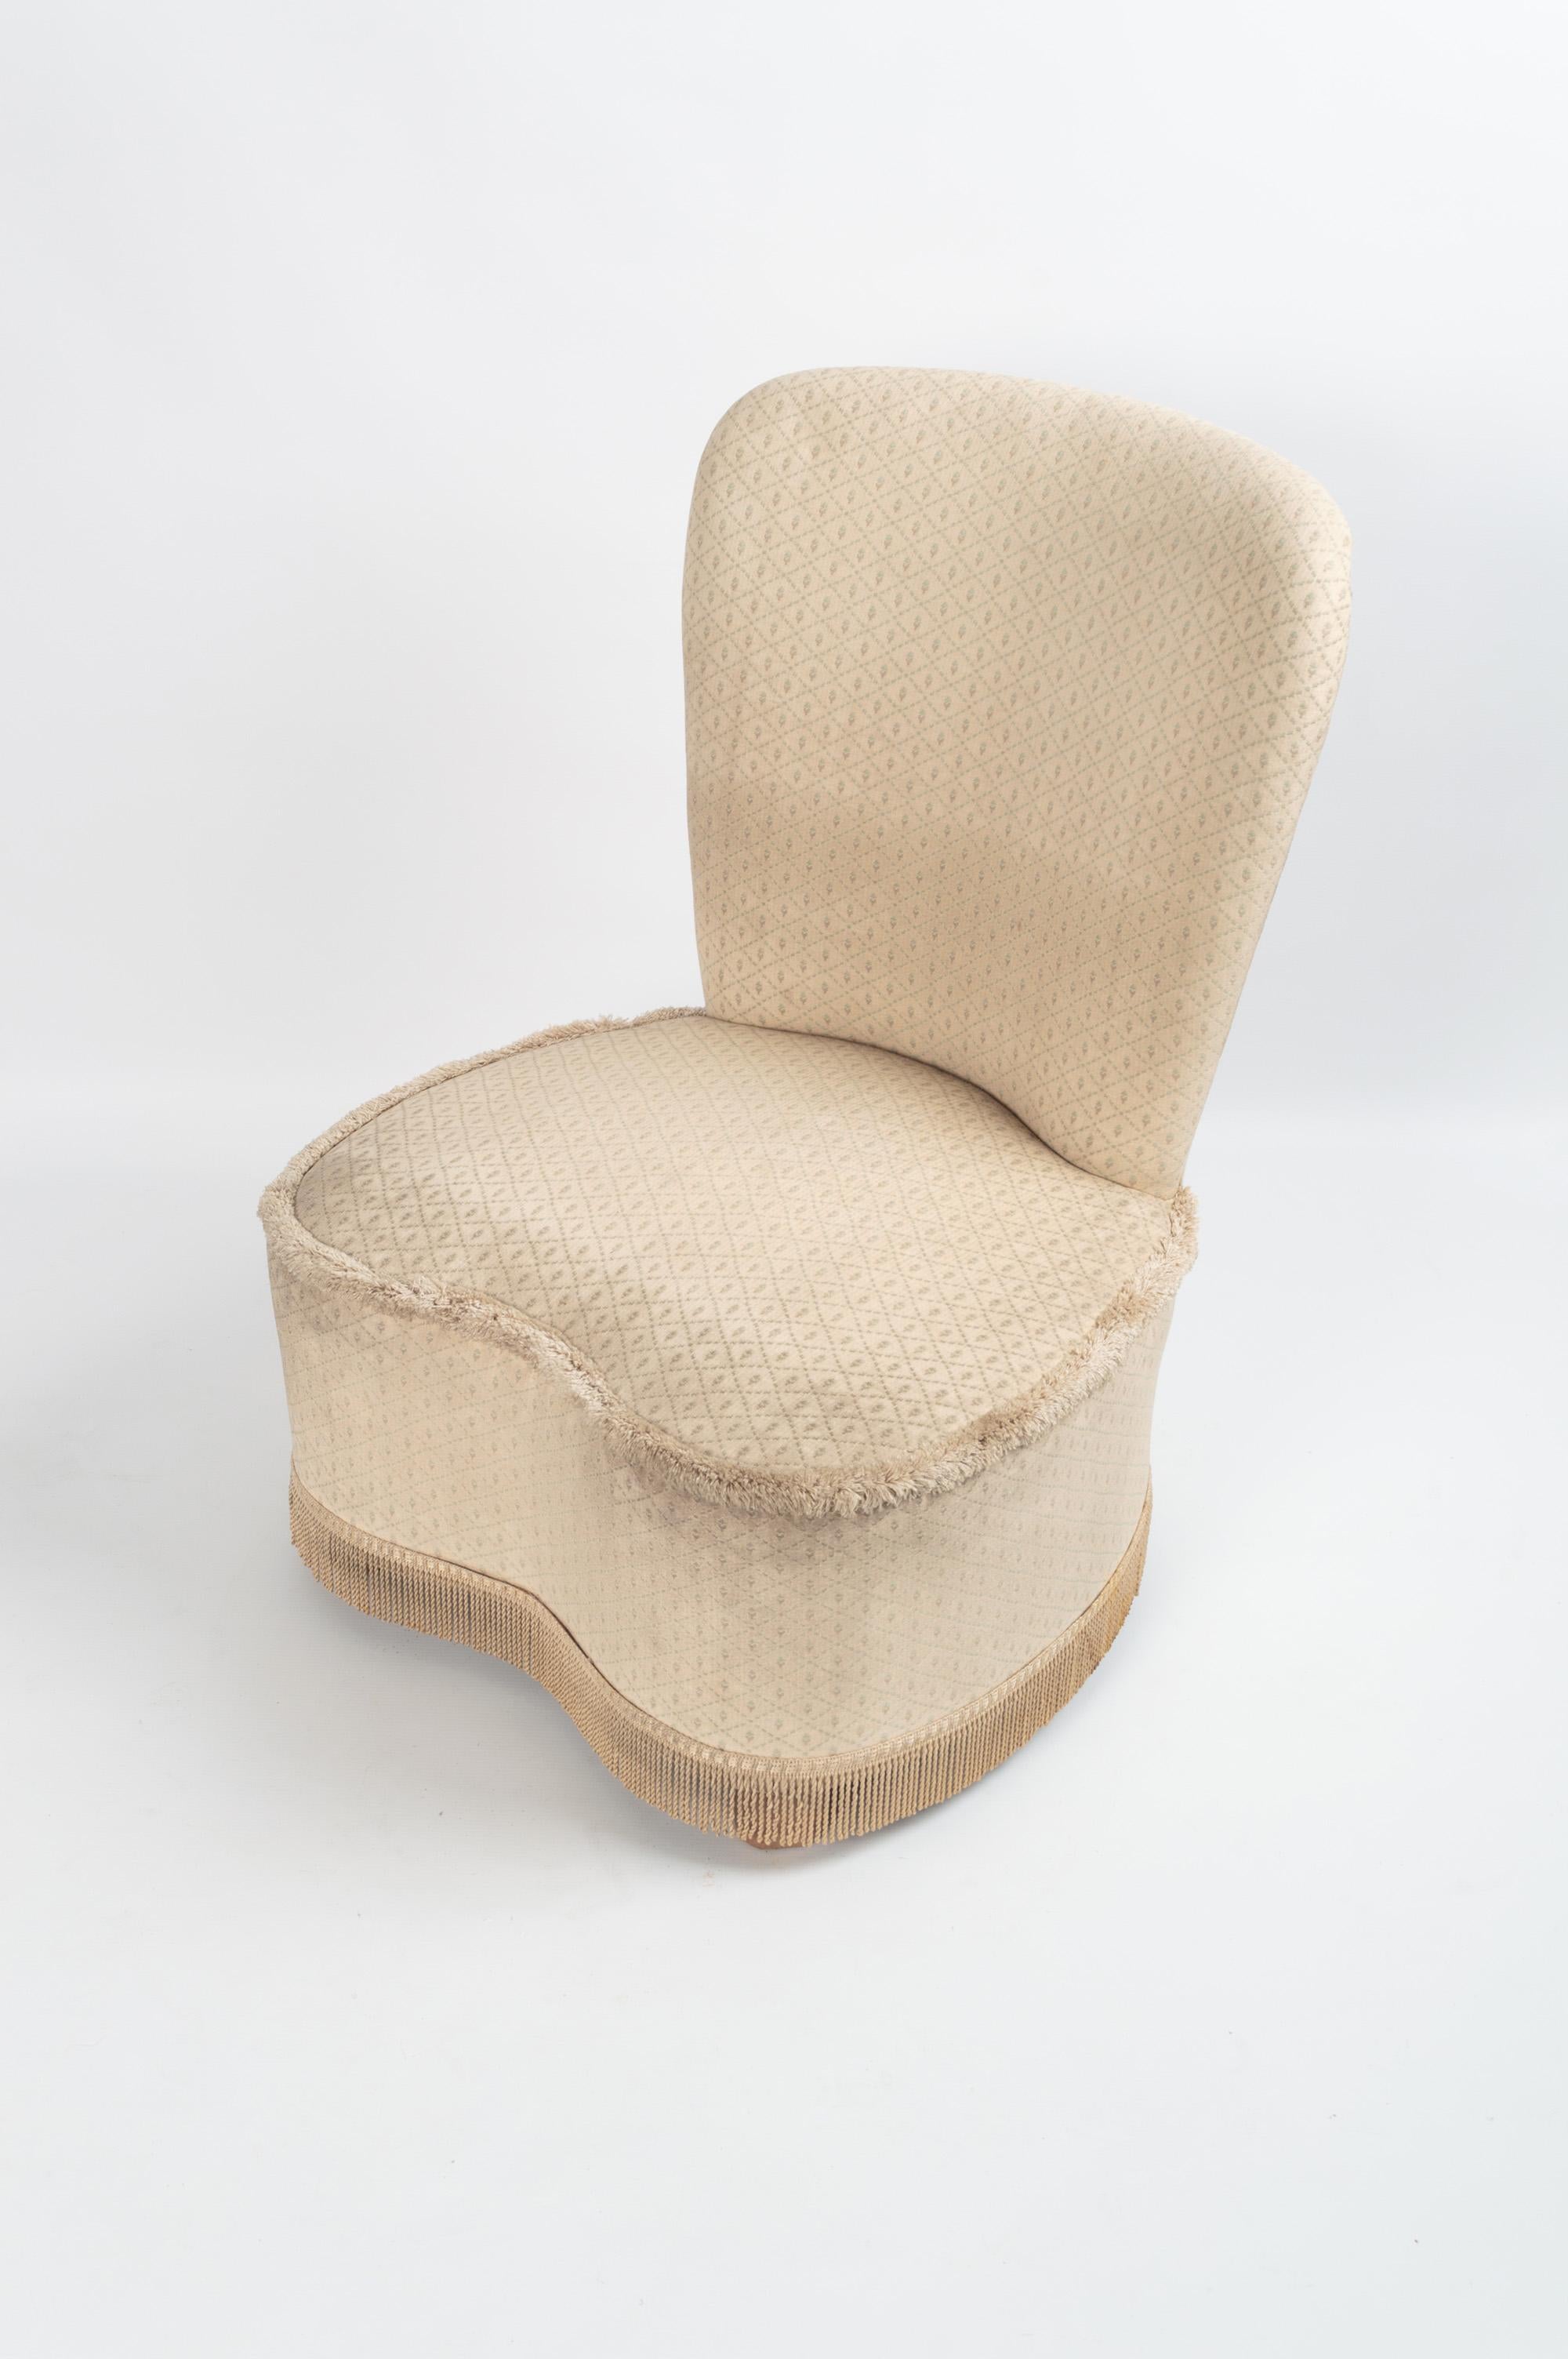 Pair of French Art Deco Upholstered Boudoir Chairs, C.1940 For Sale 2